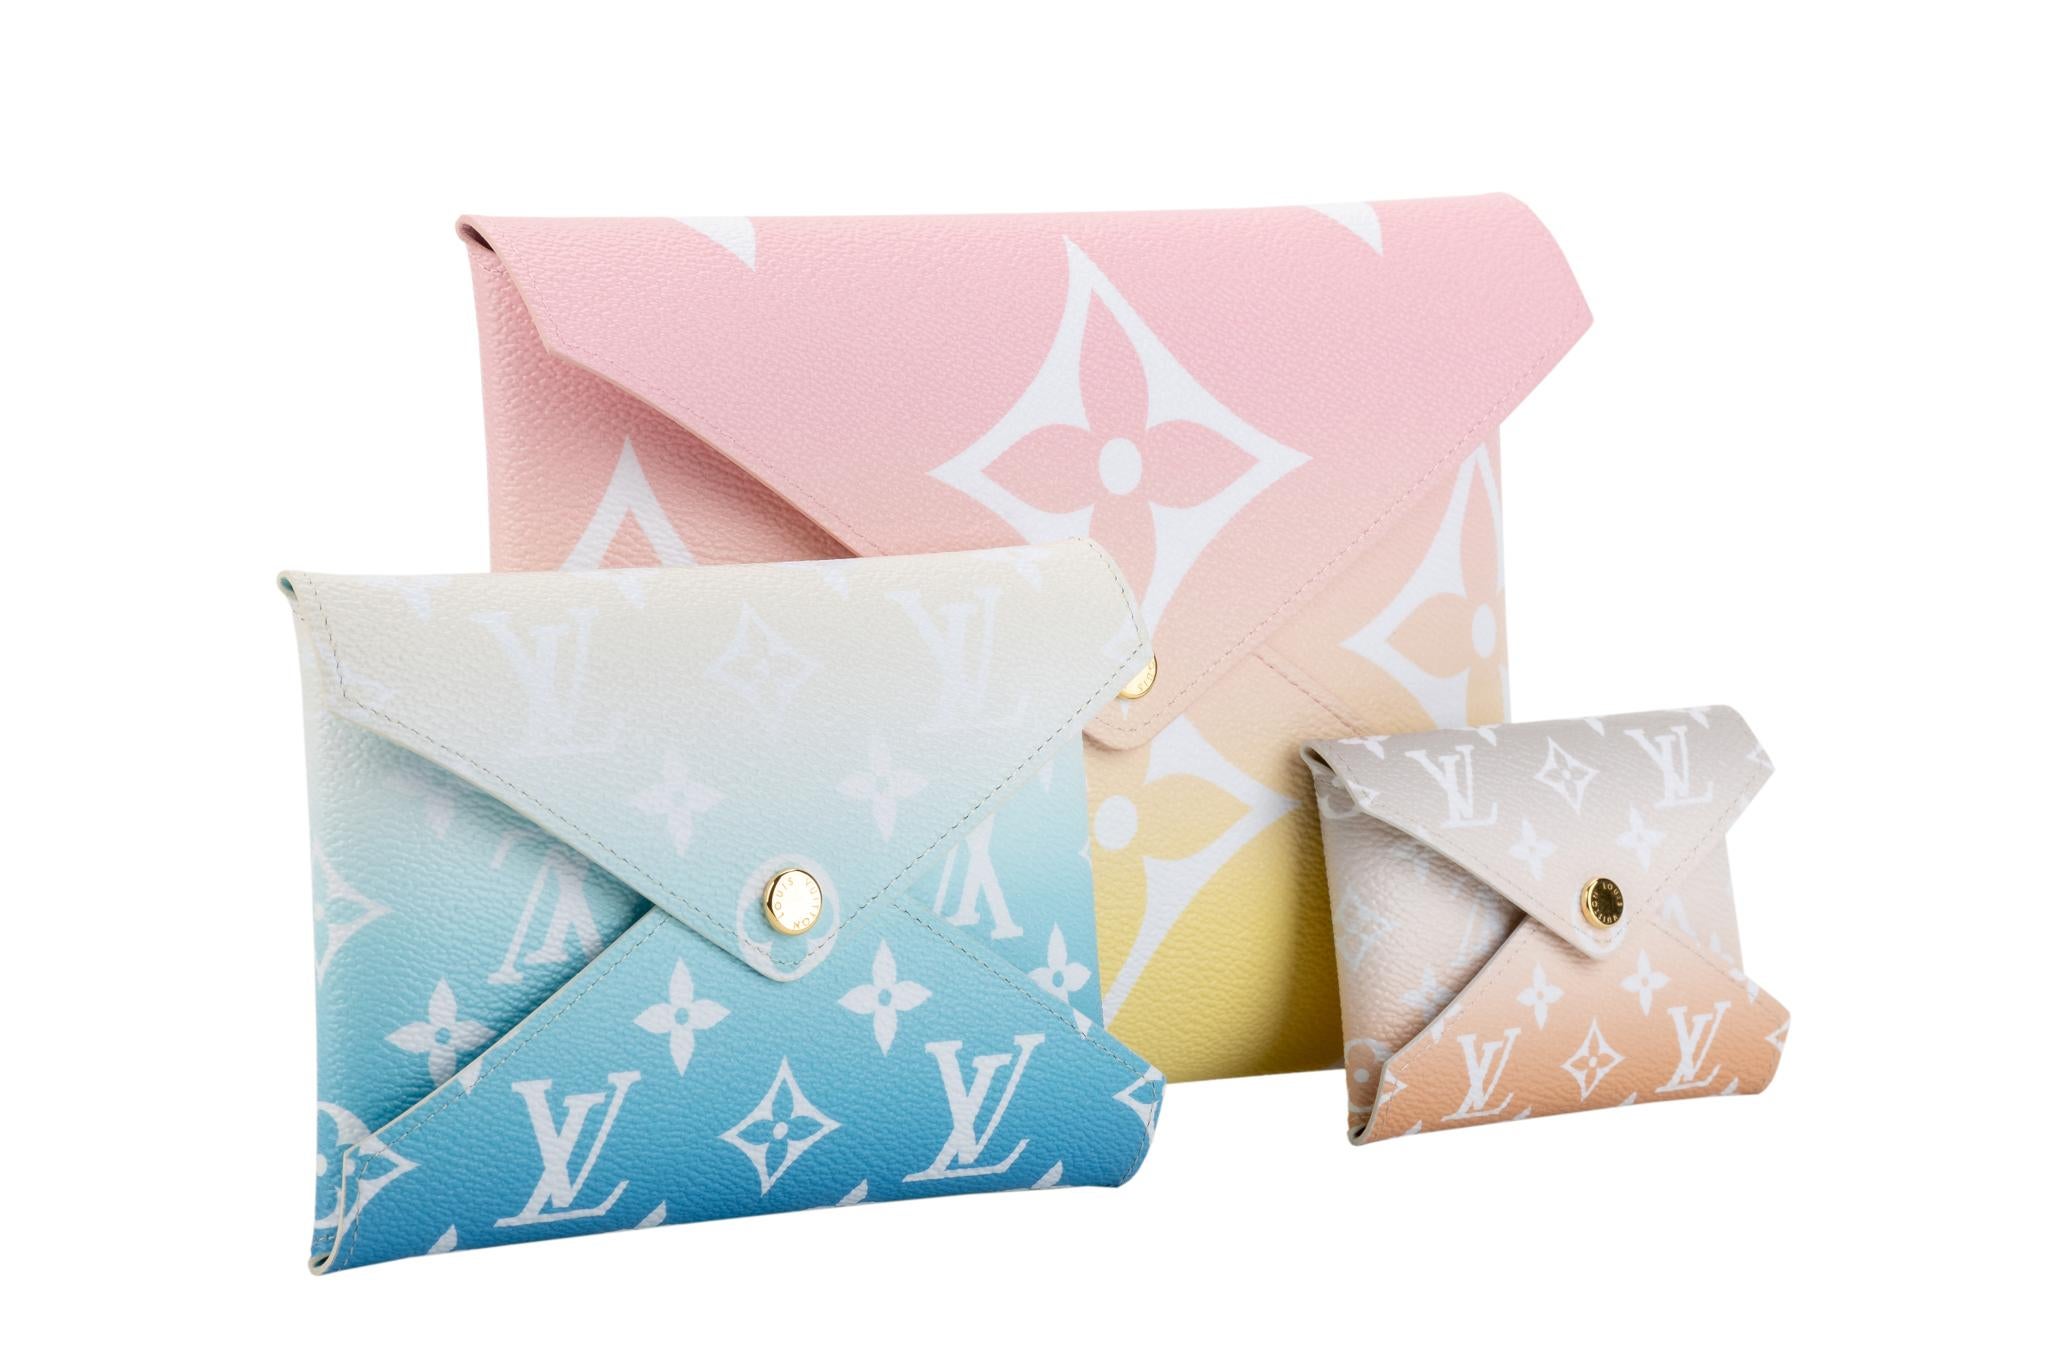 Louis Vuitton sold out worldwide ombre set of three clutches with tie die monogram design. 2021 collection. Comes with dust cover and box.